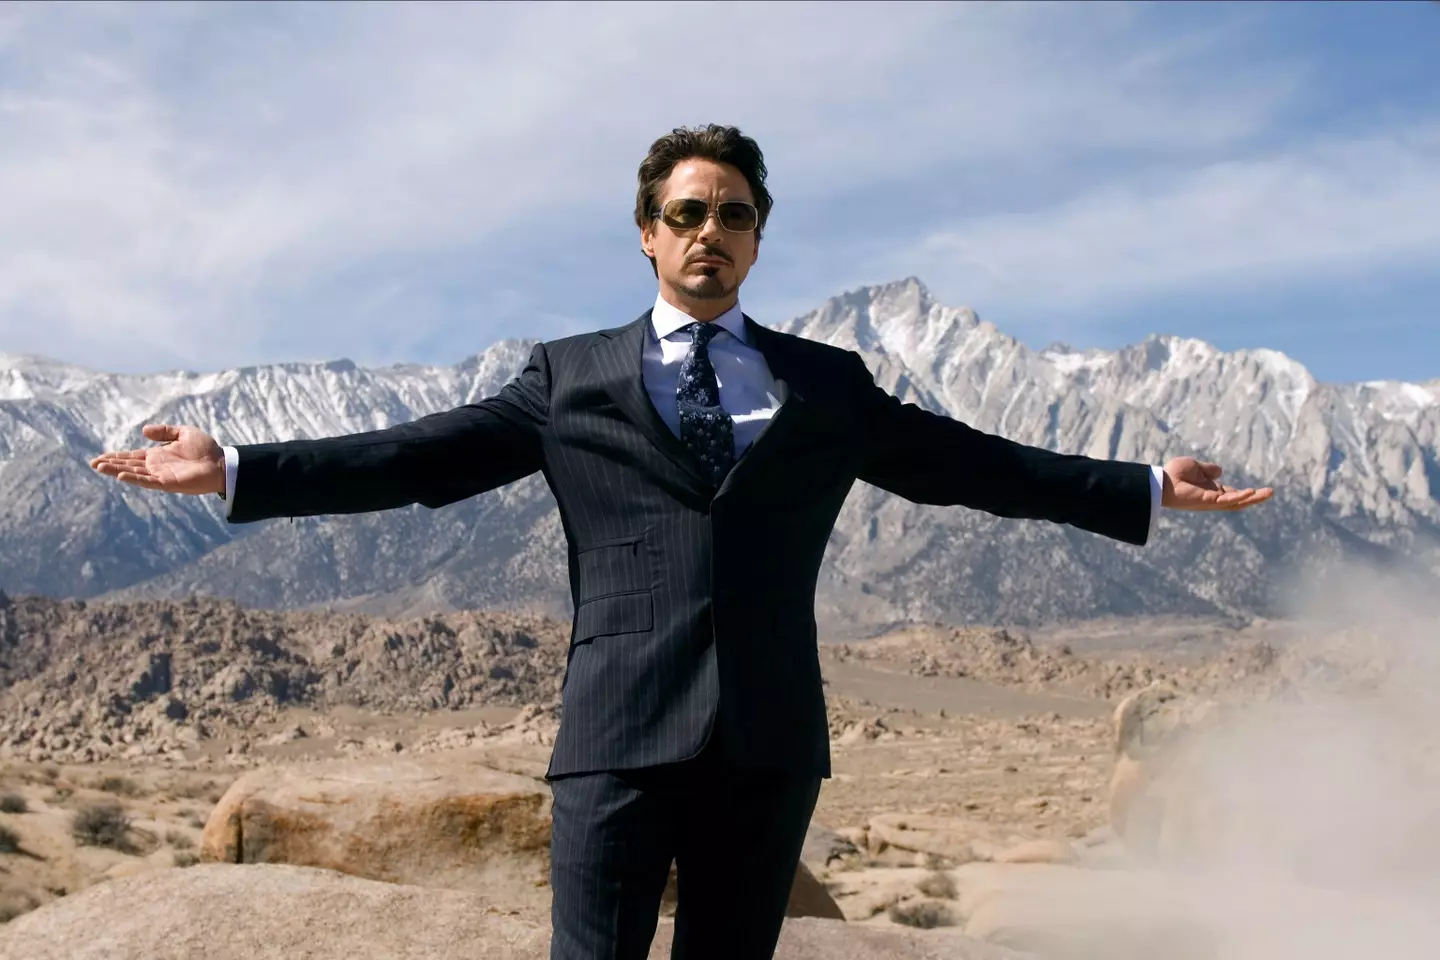 Robert Downey Jr was paid just $2.5 million for the first Iron Man film.